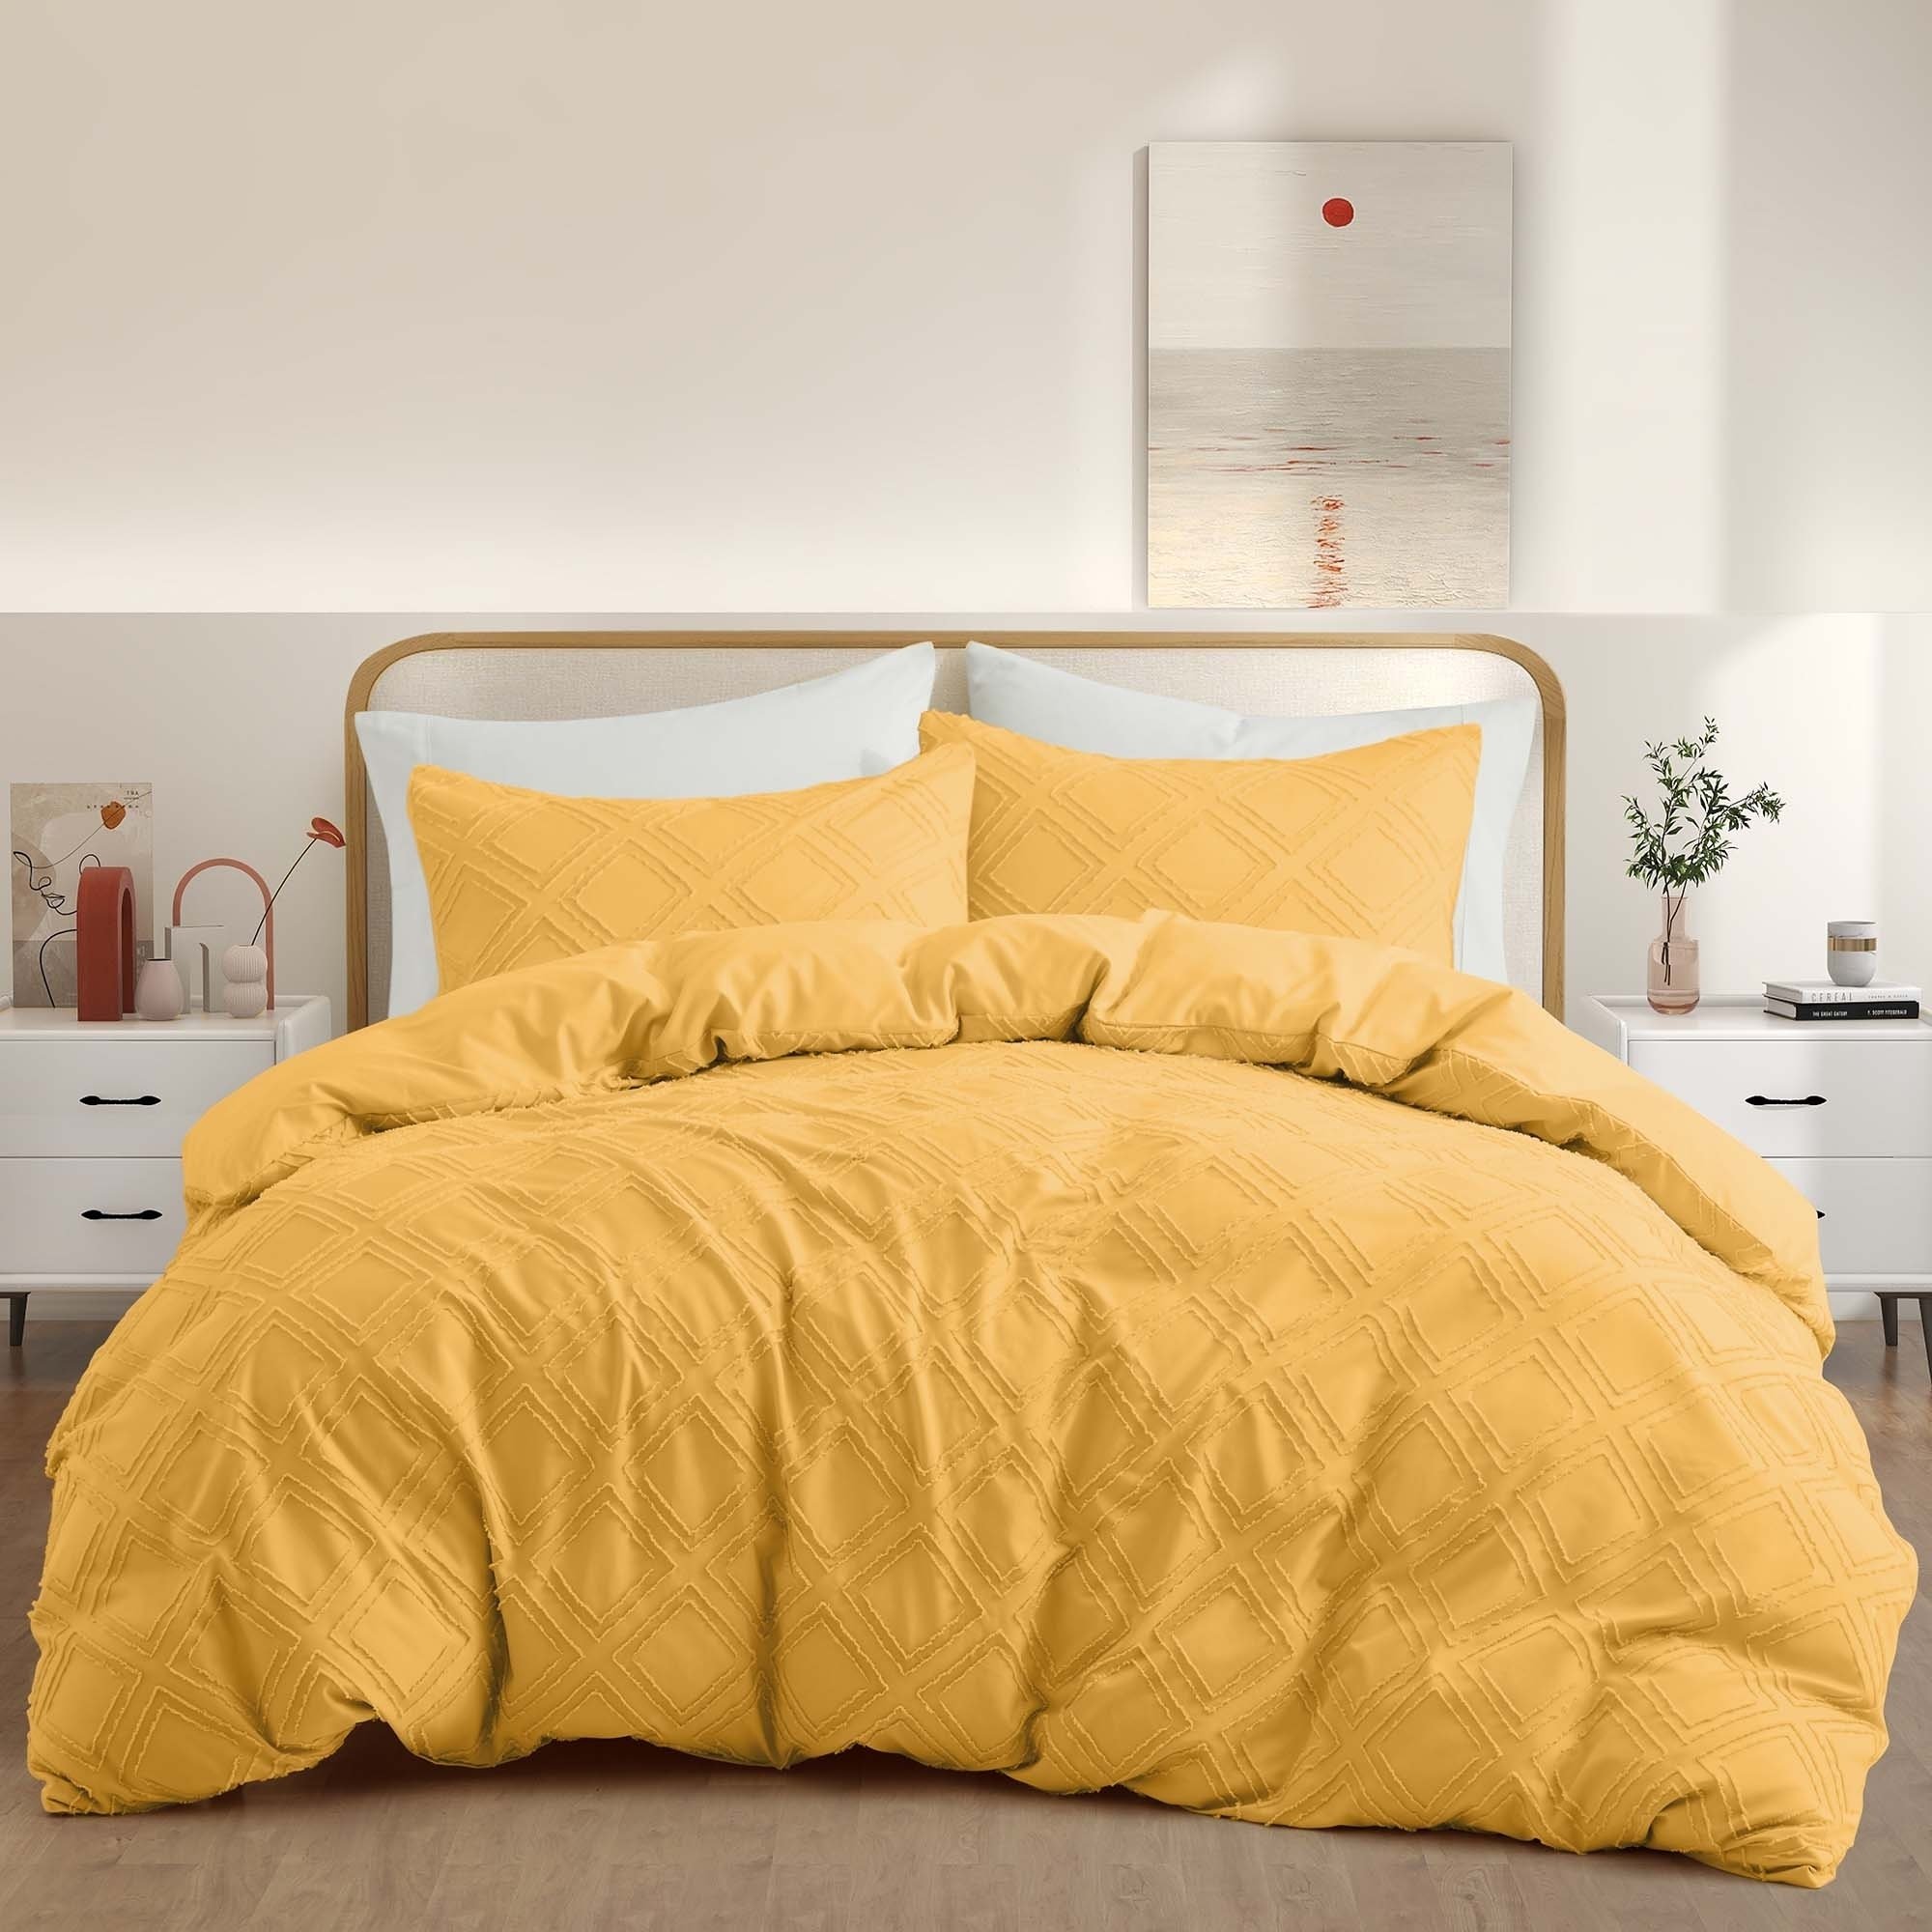 Basic Bedding Sets With All Season Goose Down Feather Comforter, 2 Pack Goose Down Pillows, Duvet Cover Set - Yellow Bundles Option, Twin Si